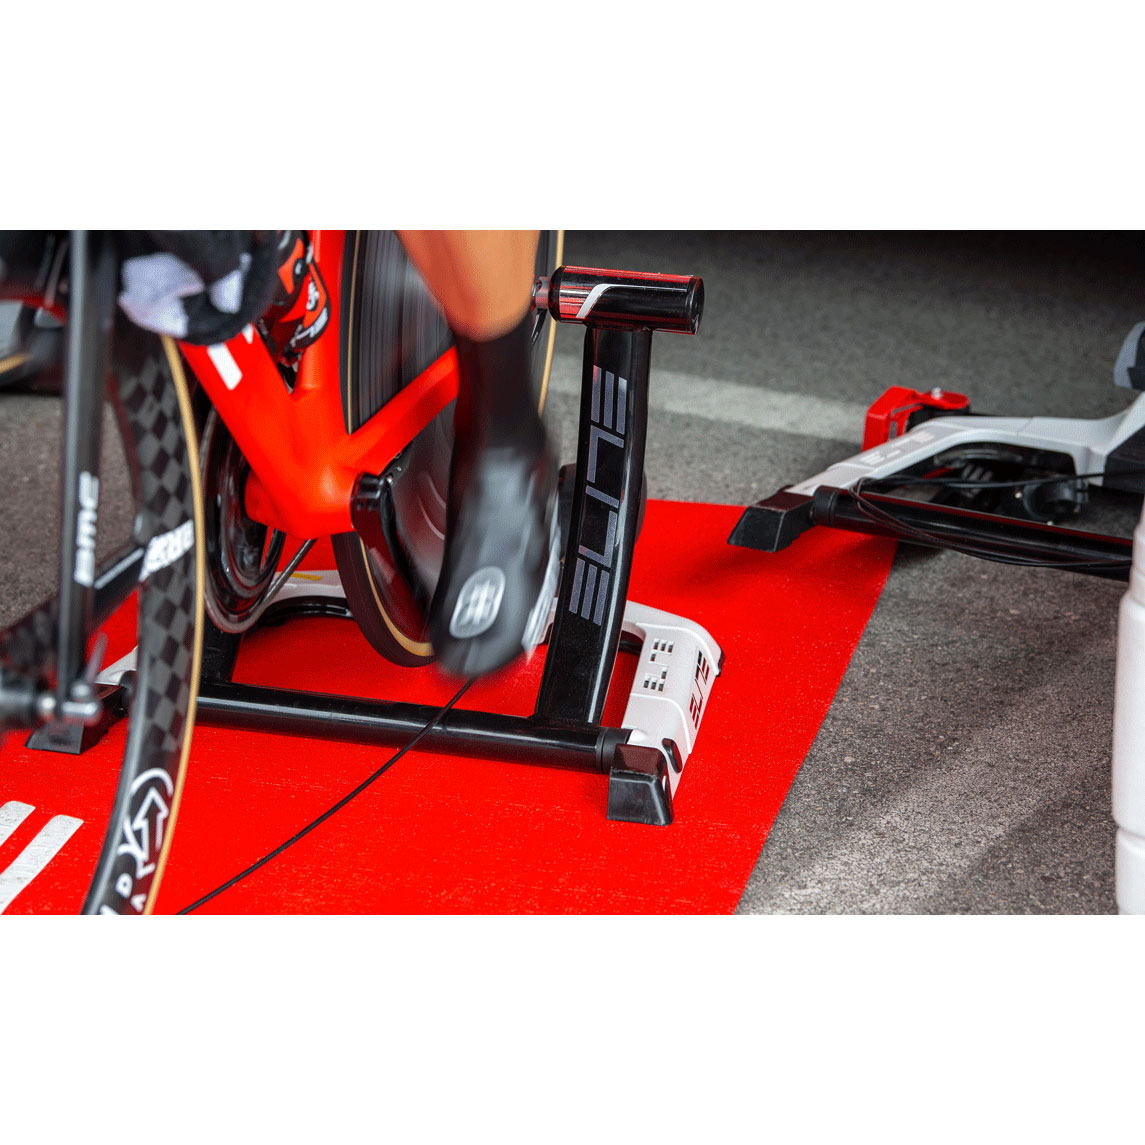 Elite Qubo Power Mag Smart B+ - Wheel On Cycletrainer - white/red